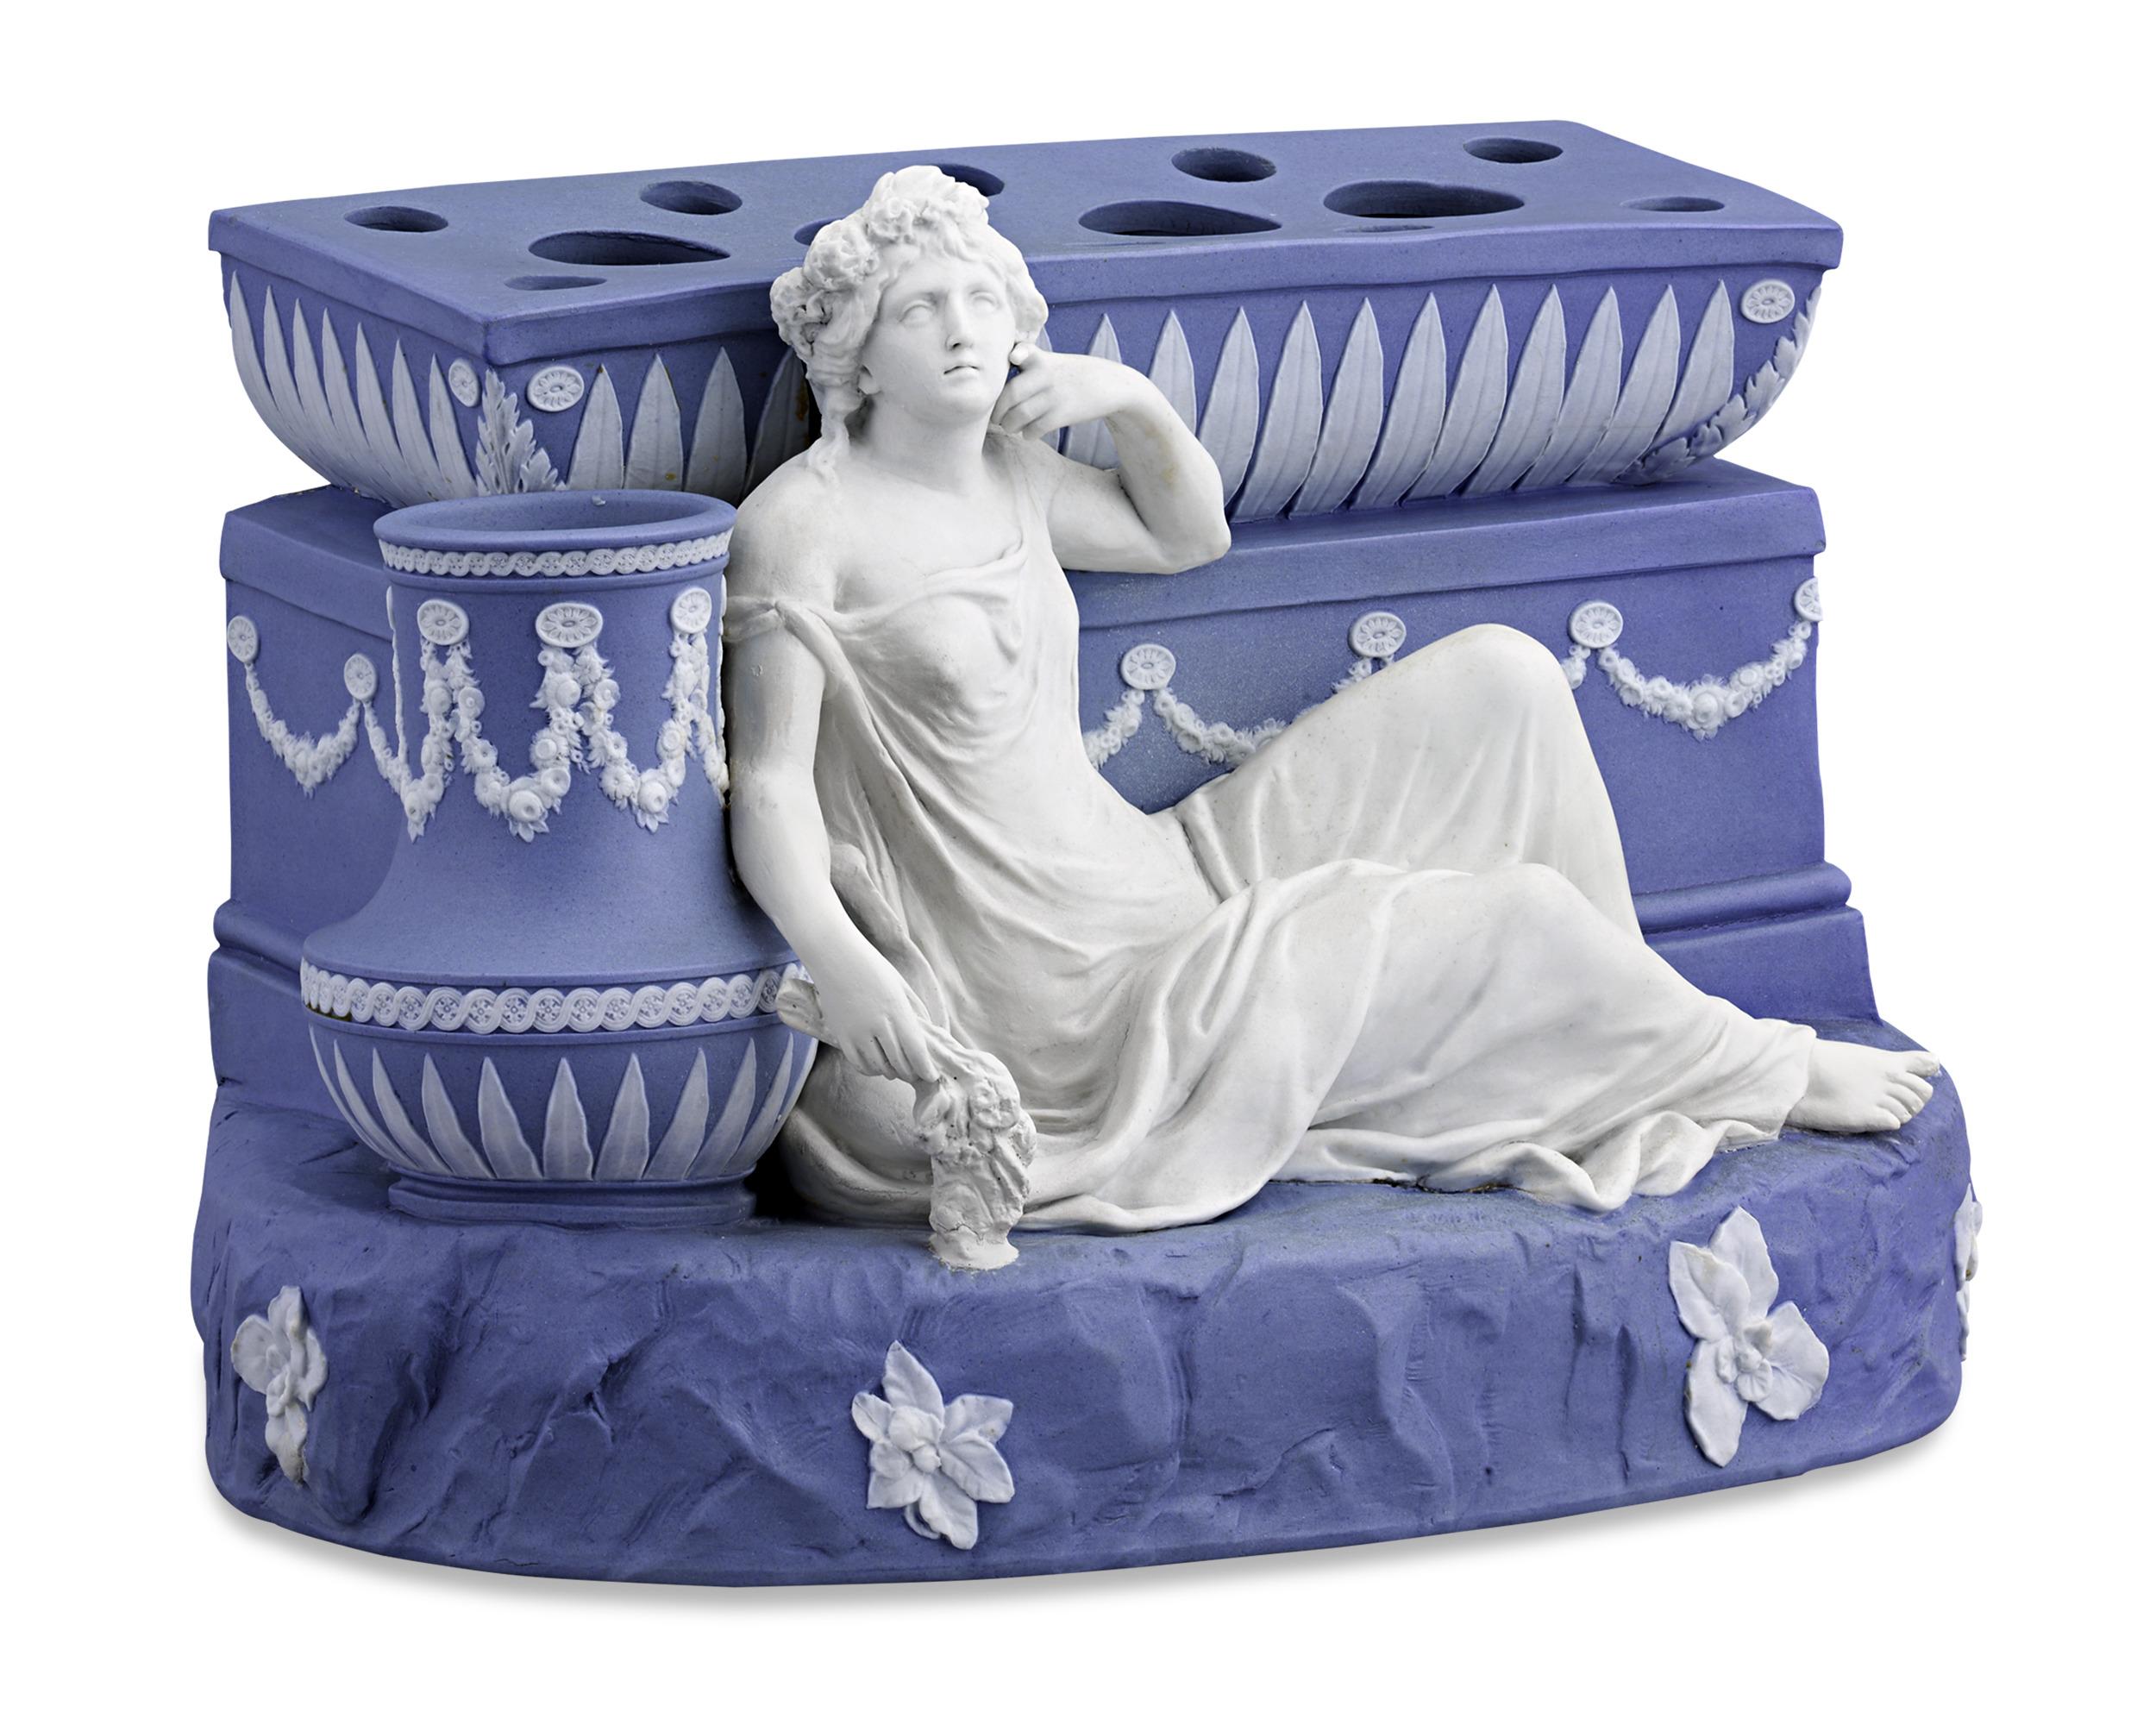 This impressive Wedgwood flower holder is made of the firm’s highly prized blue jasperware with applied white jasper accents. The centerpiece, designed to display “boughs” or flowers, is presented in a stunning Neoclassical motif. The mythological